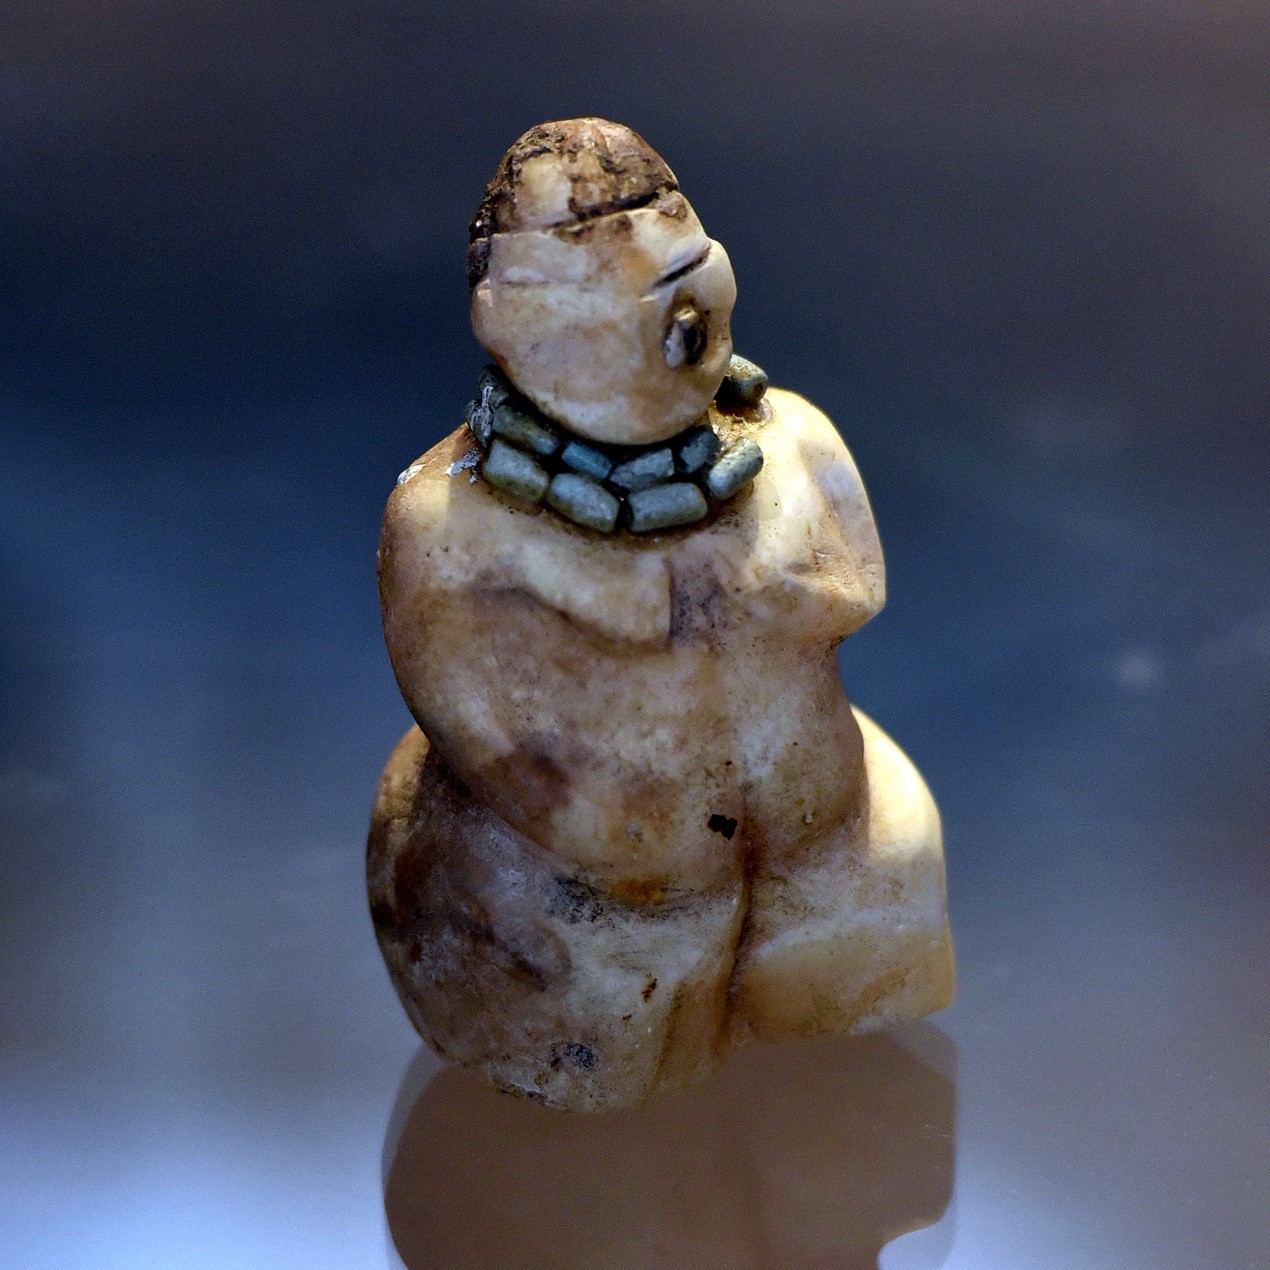 This small marble figurine was found at Tell es-Sawwan. Probably, it represents a mother goddess. The eyes are inlaid with shells set in bitumen. Tell es-Sawwan is an ancient archaeological site in Saladin Province (about 110 Km north of Baghdad) and is associated with the Samarra culture. 6000-5800 BCE. On display at the Iraq Museum in Baghdad, Iraq. Photo: Osama Shukir Muhammed Amin